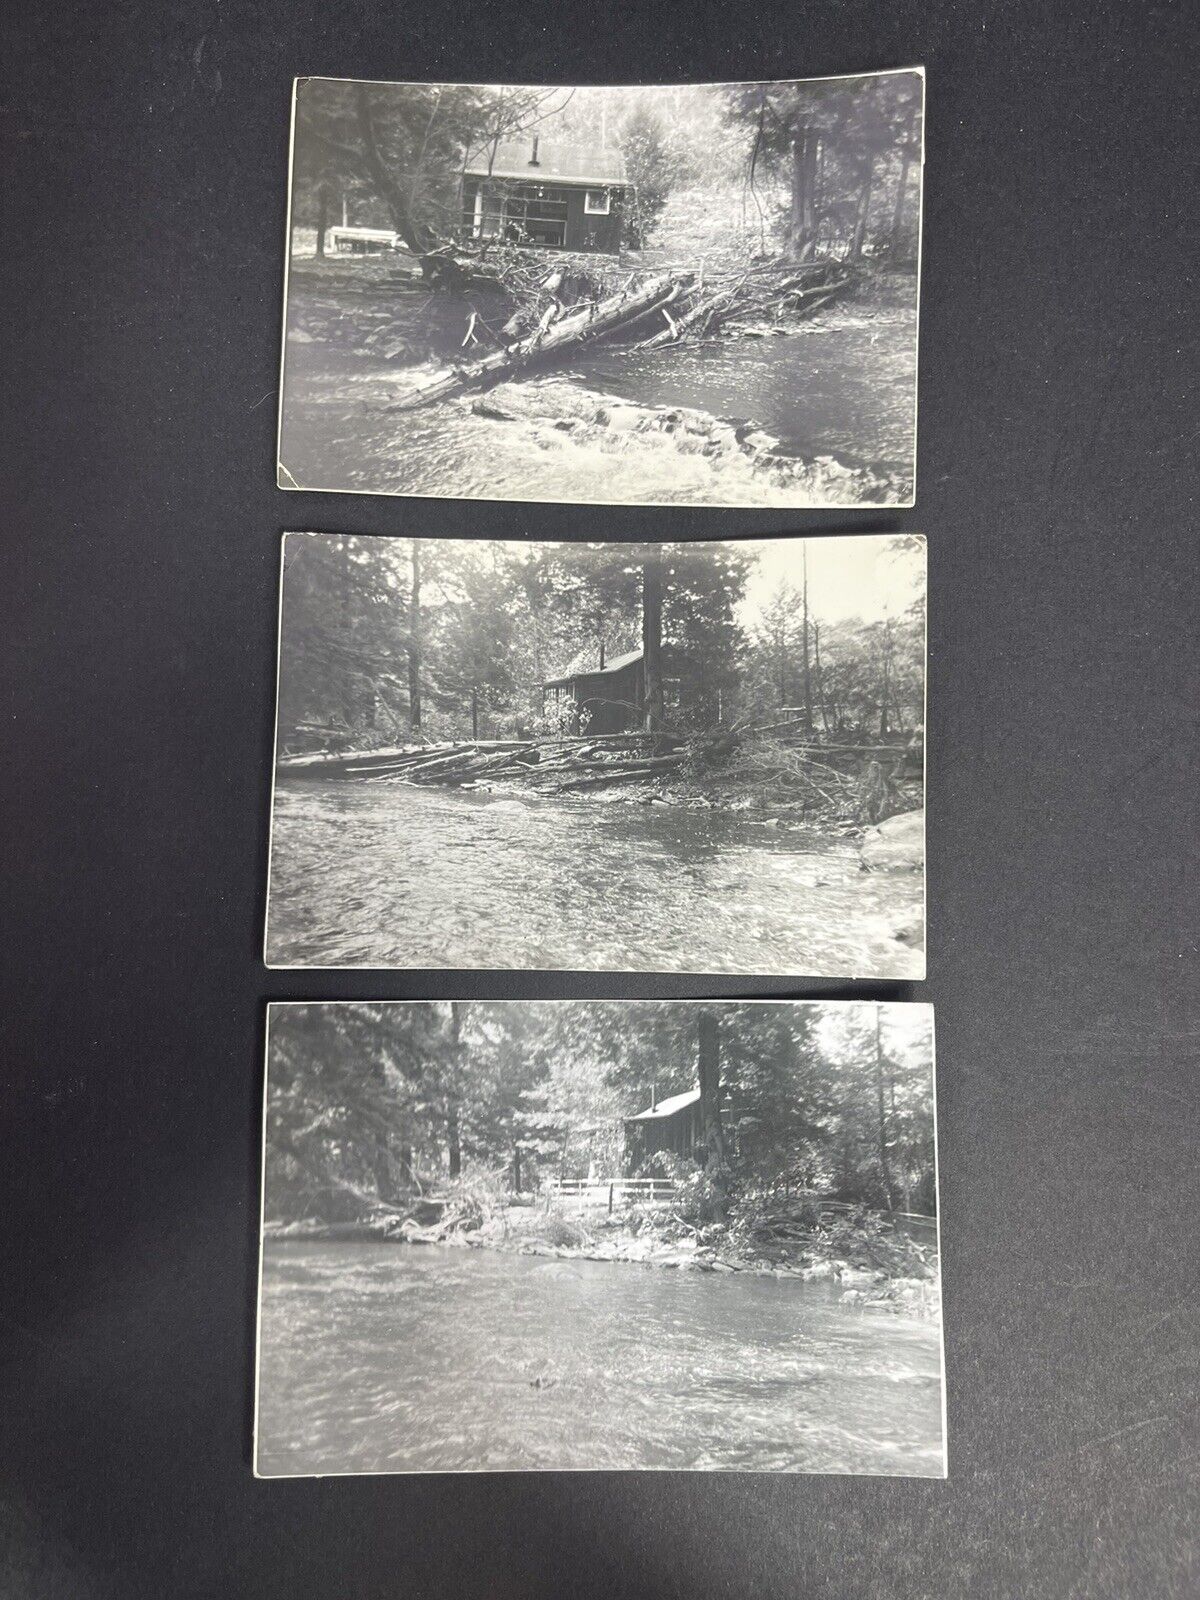 Lot Of 3 Photographs Of A Flood - Broken Trees, Rushing Water See Description